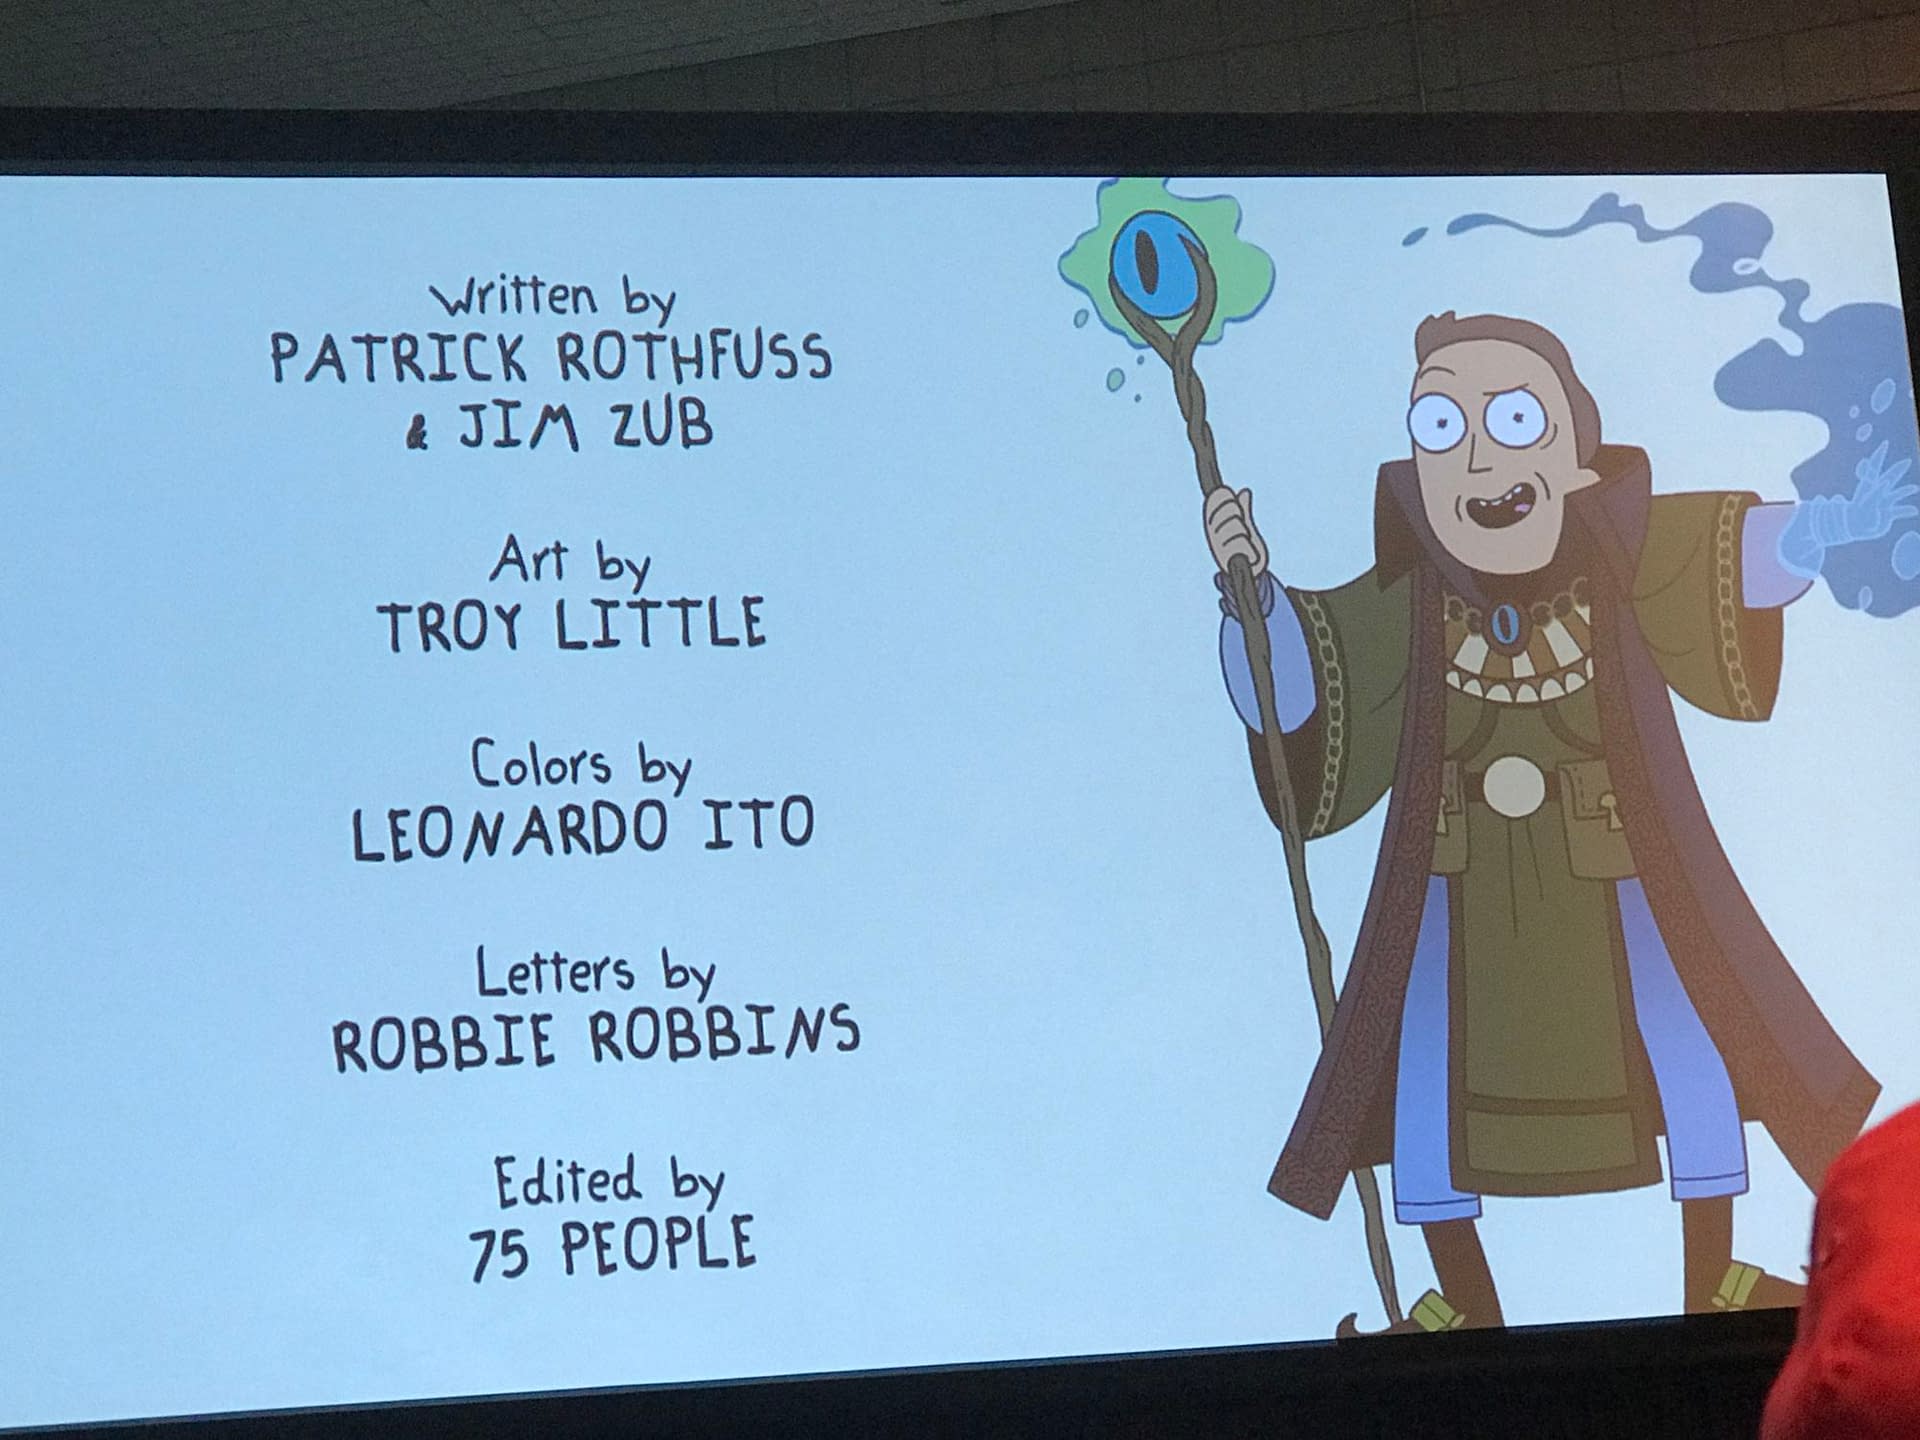 Rick and Morty D&D NYCC